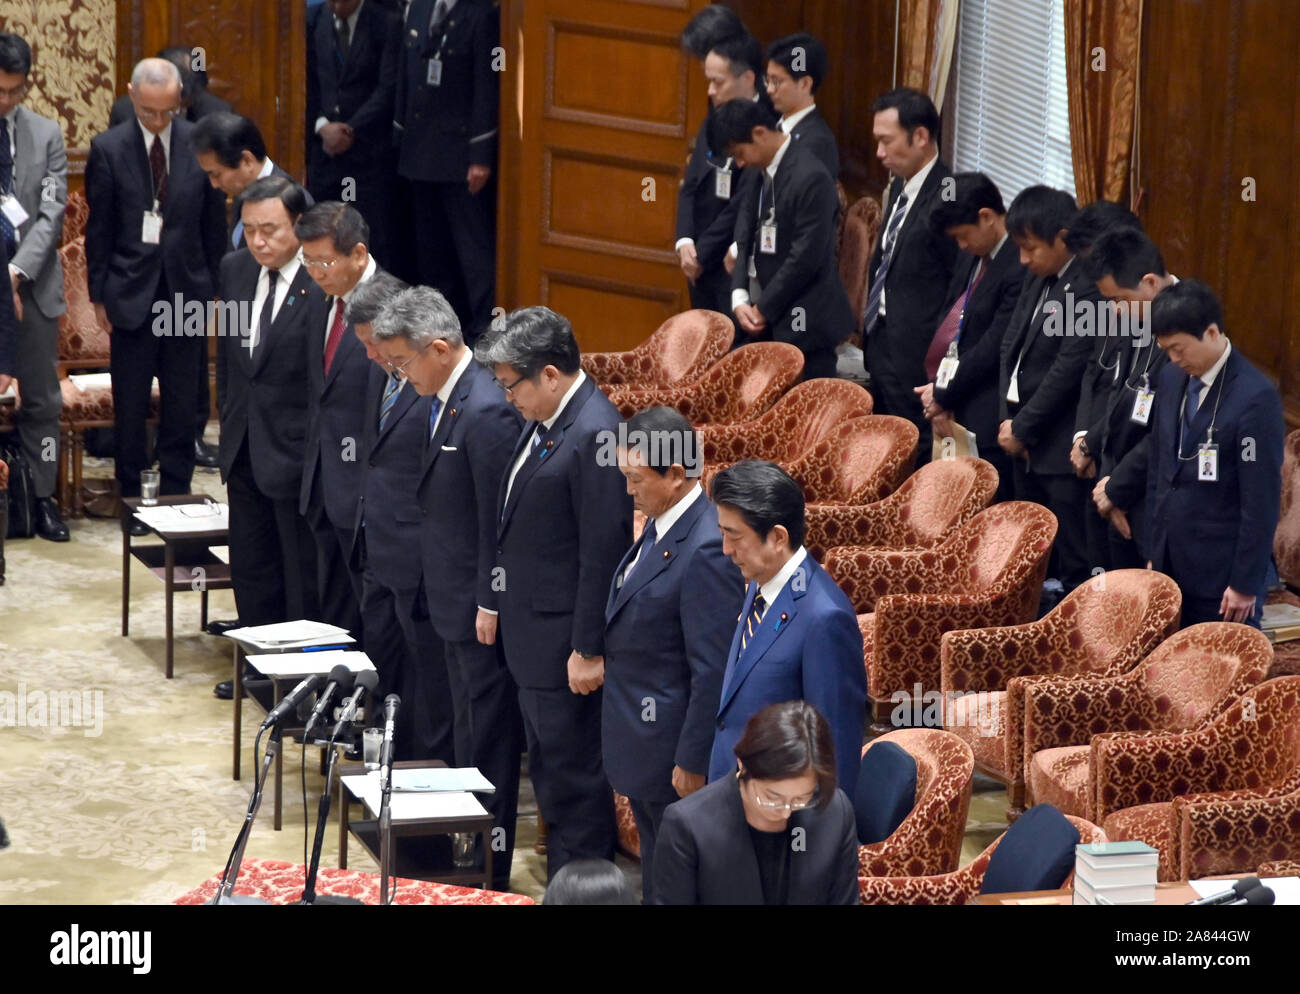 Tokyo, Japan. 6th Nov, 2019. Japans Prime Minister Shinzo Abe, second from right, and his Cabinet ministers offer a one-minute silent prayer to those perished in the recent typhoon that has wreaked havoc over wide swaths of Japans northeastern regions prior to Wednesdays meeting of the Diet lower house budget committee in Tokyo on November 6, 2019. Credit: Natsuki Sakai/AFLO/Alamy Live News Stock Photo